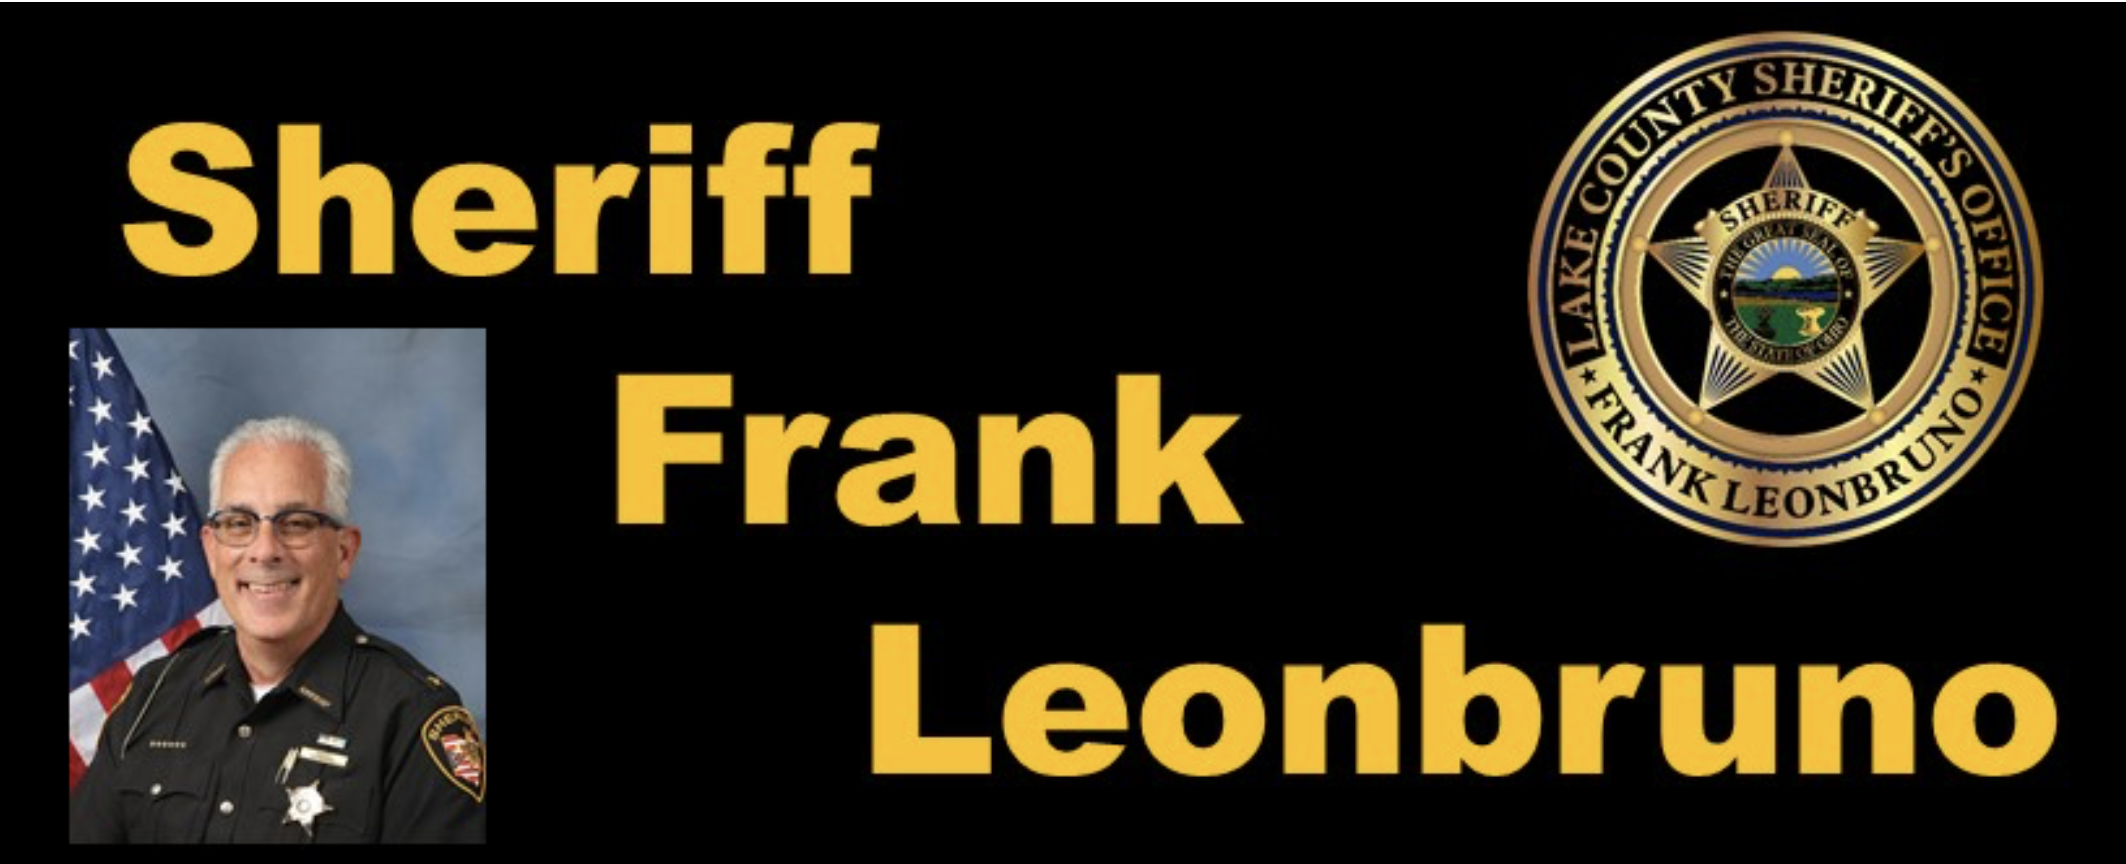 RE-ELECT Frank Leonbruno as Sheriff of Lake County, Ohio.